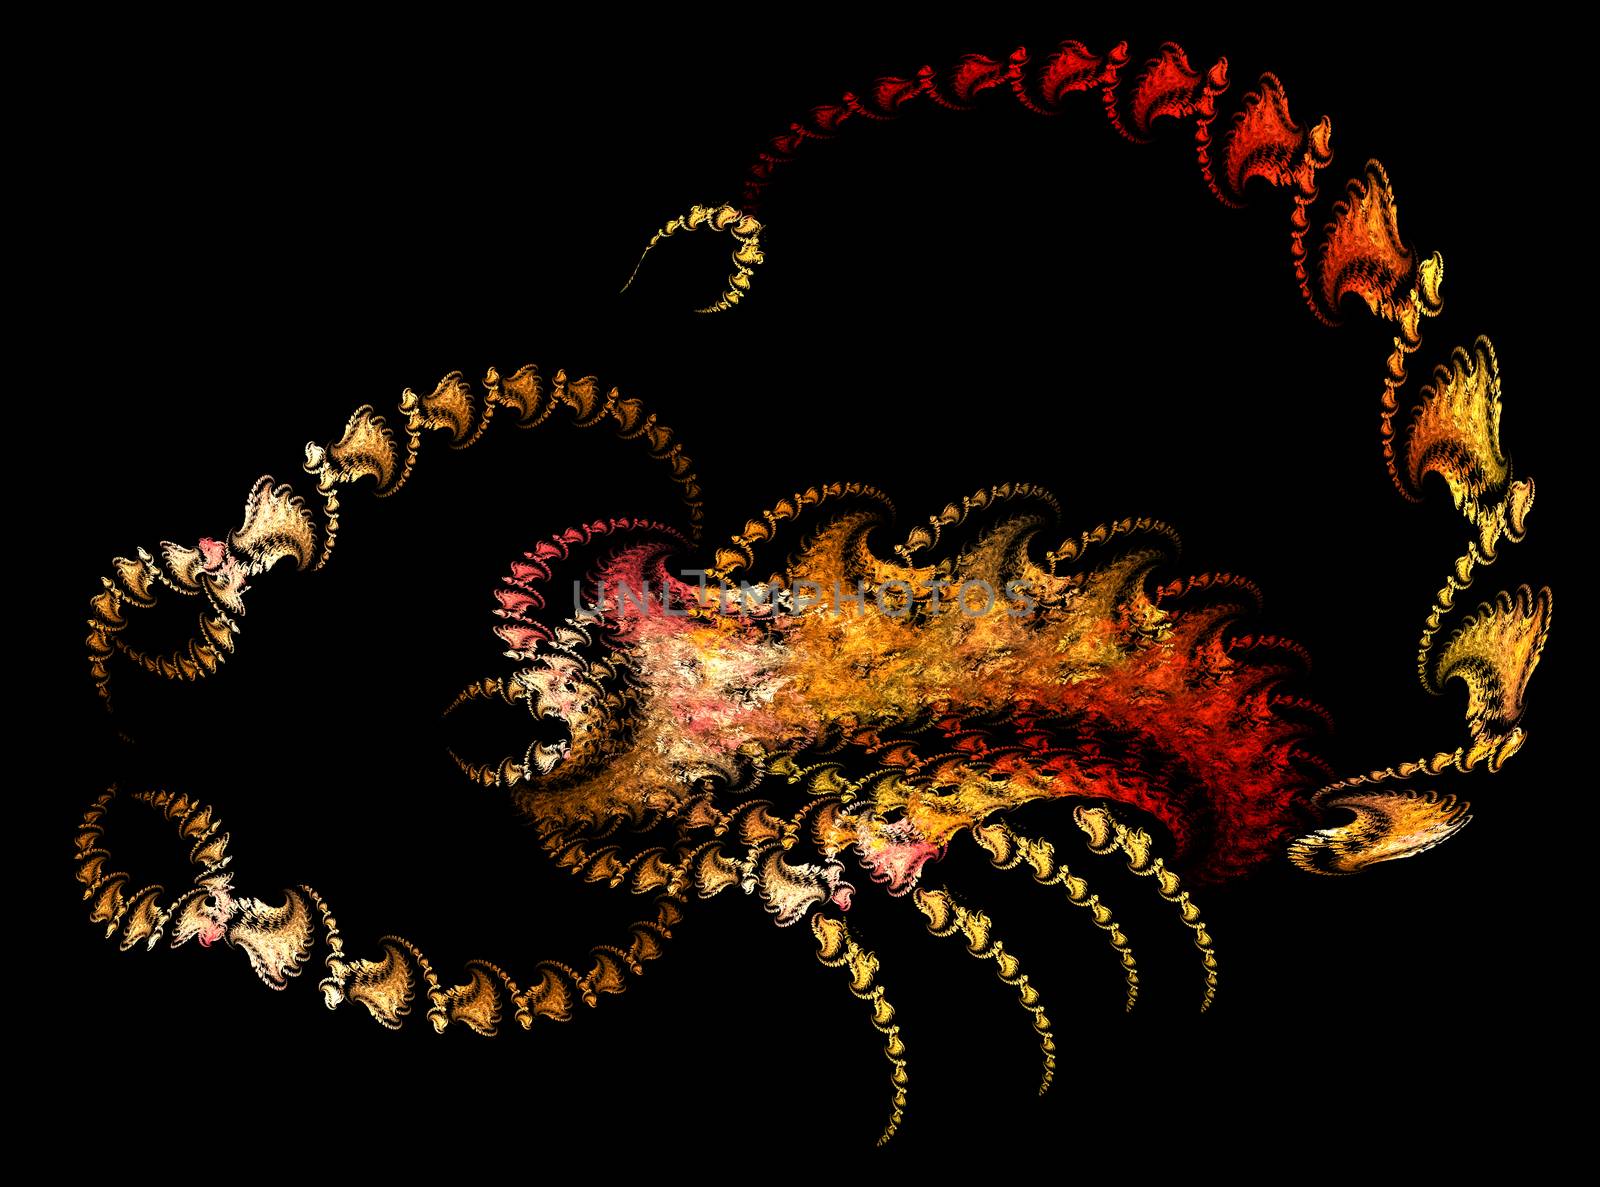 Fractals, abstract Scorpion on a black background by Gaina